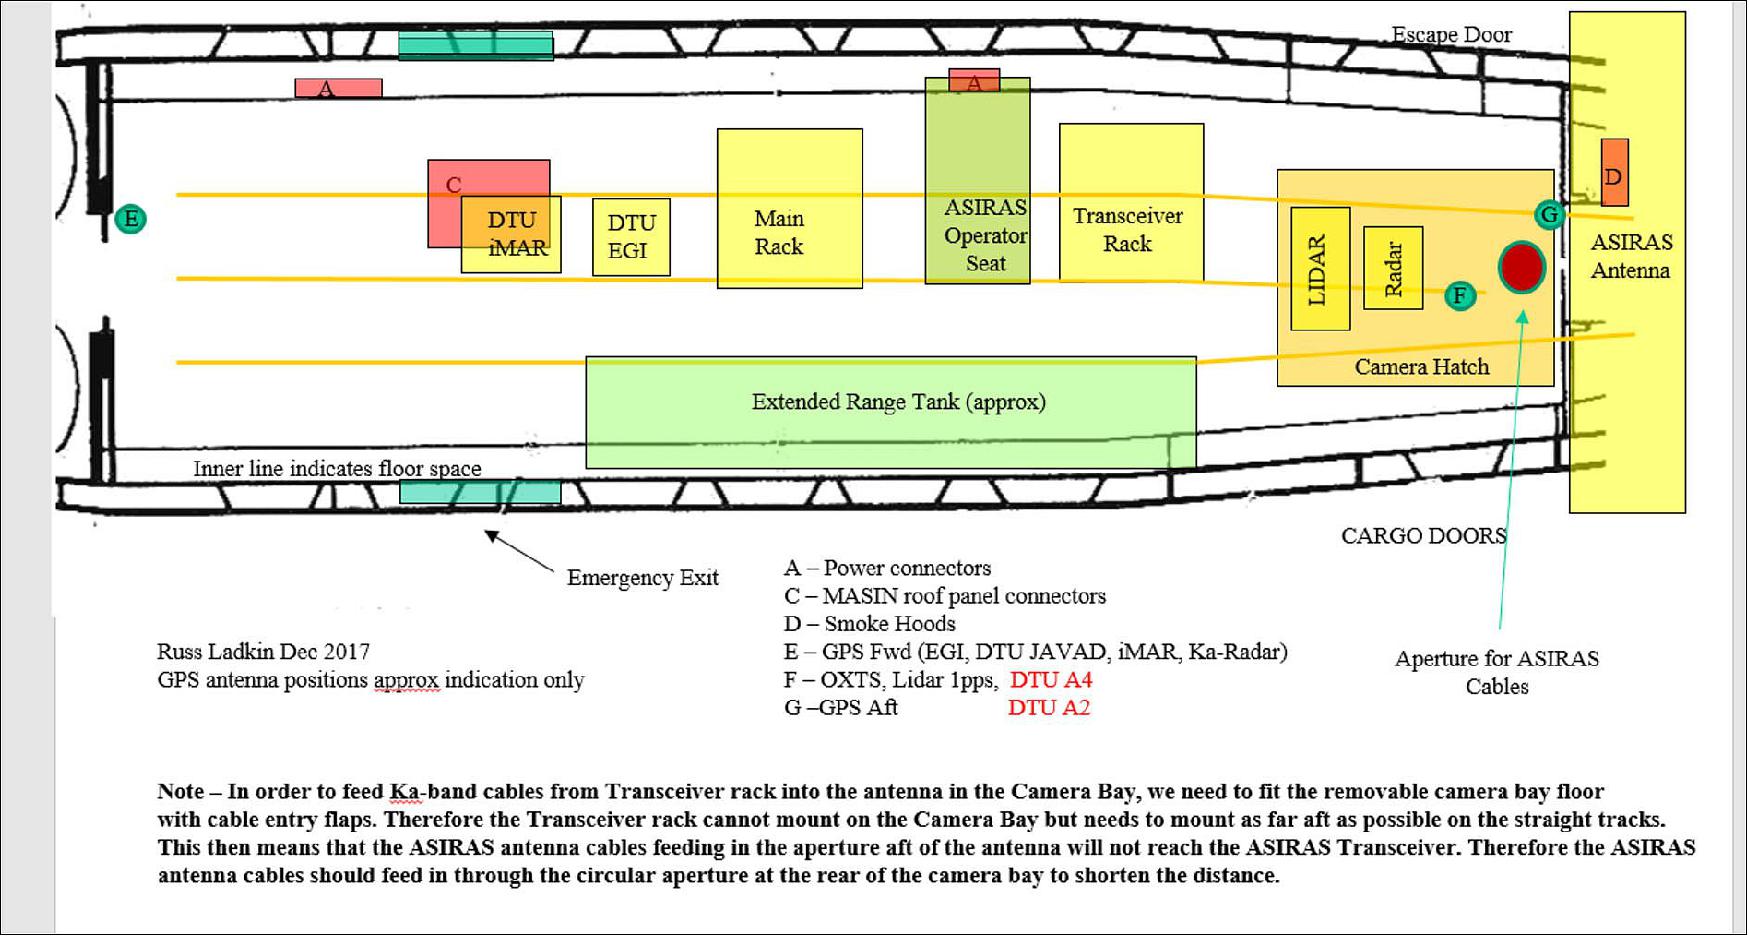 Figure 39: Overview of instrument setup in the VP-FAZ Twin Otter aircraft (image credit: DTU Space, ESA)